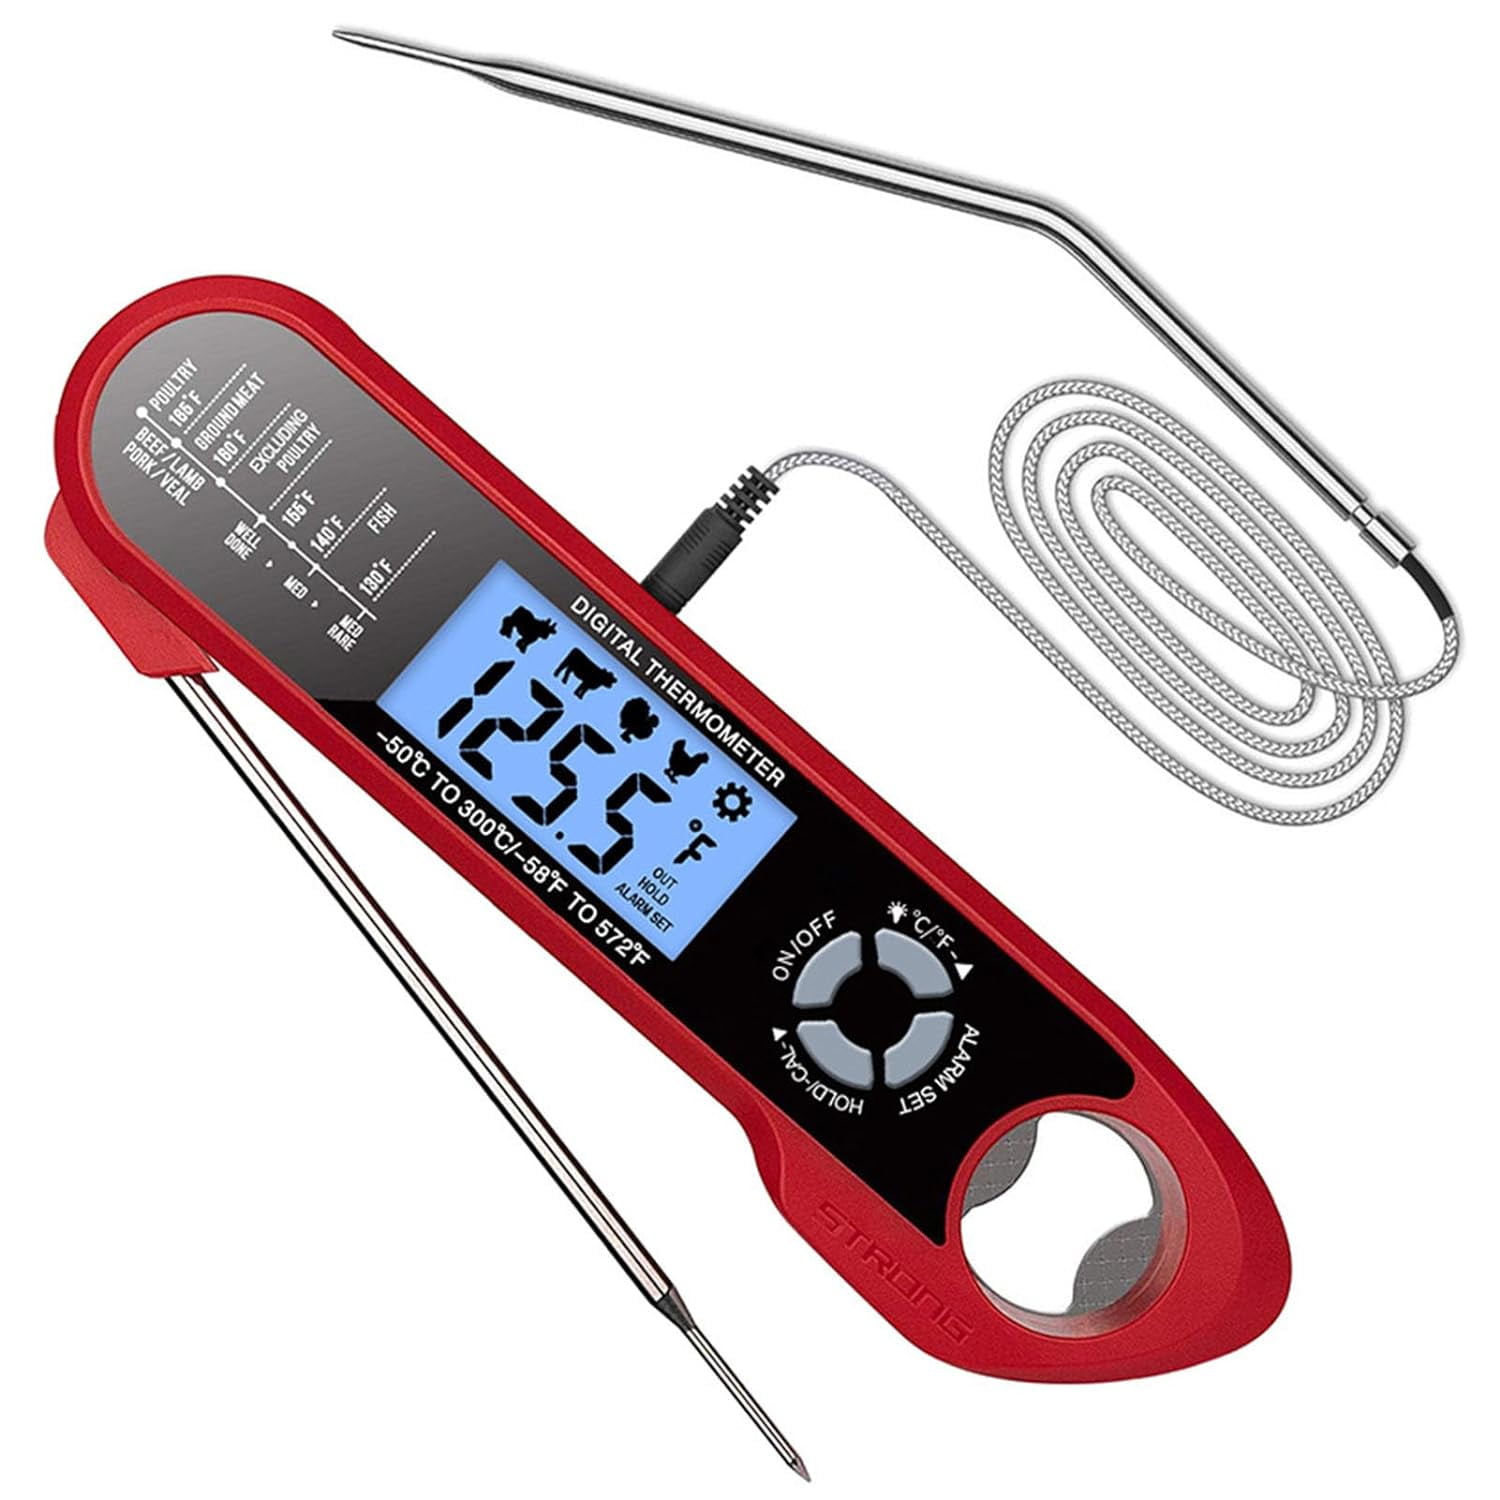 HIC Roasting Meat Poultry Turkey Grill Thermometer, 3in